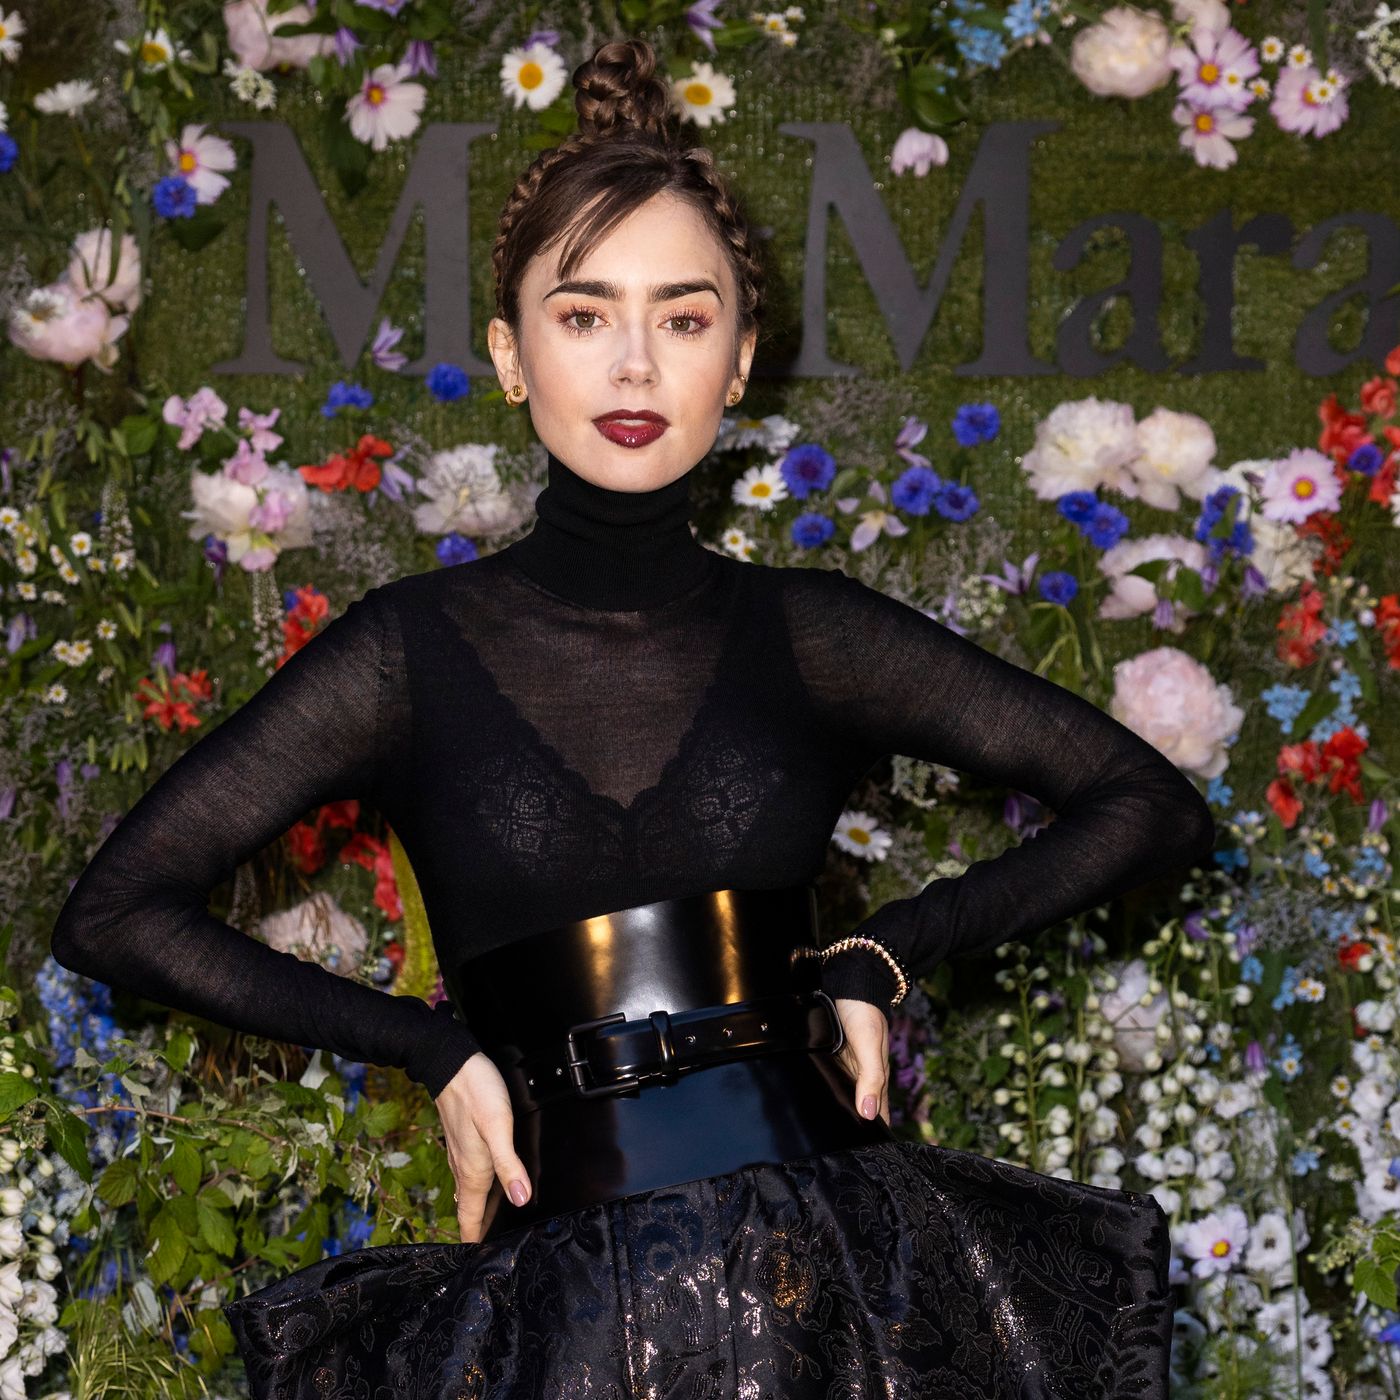 Lily Collins, Lena Dunham attached to Mattel's 'Polly Pocket